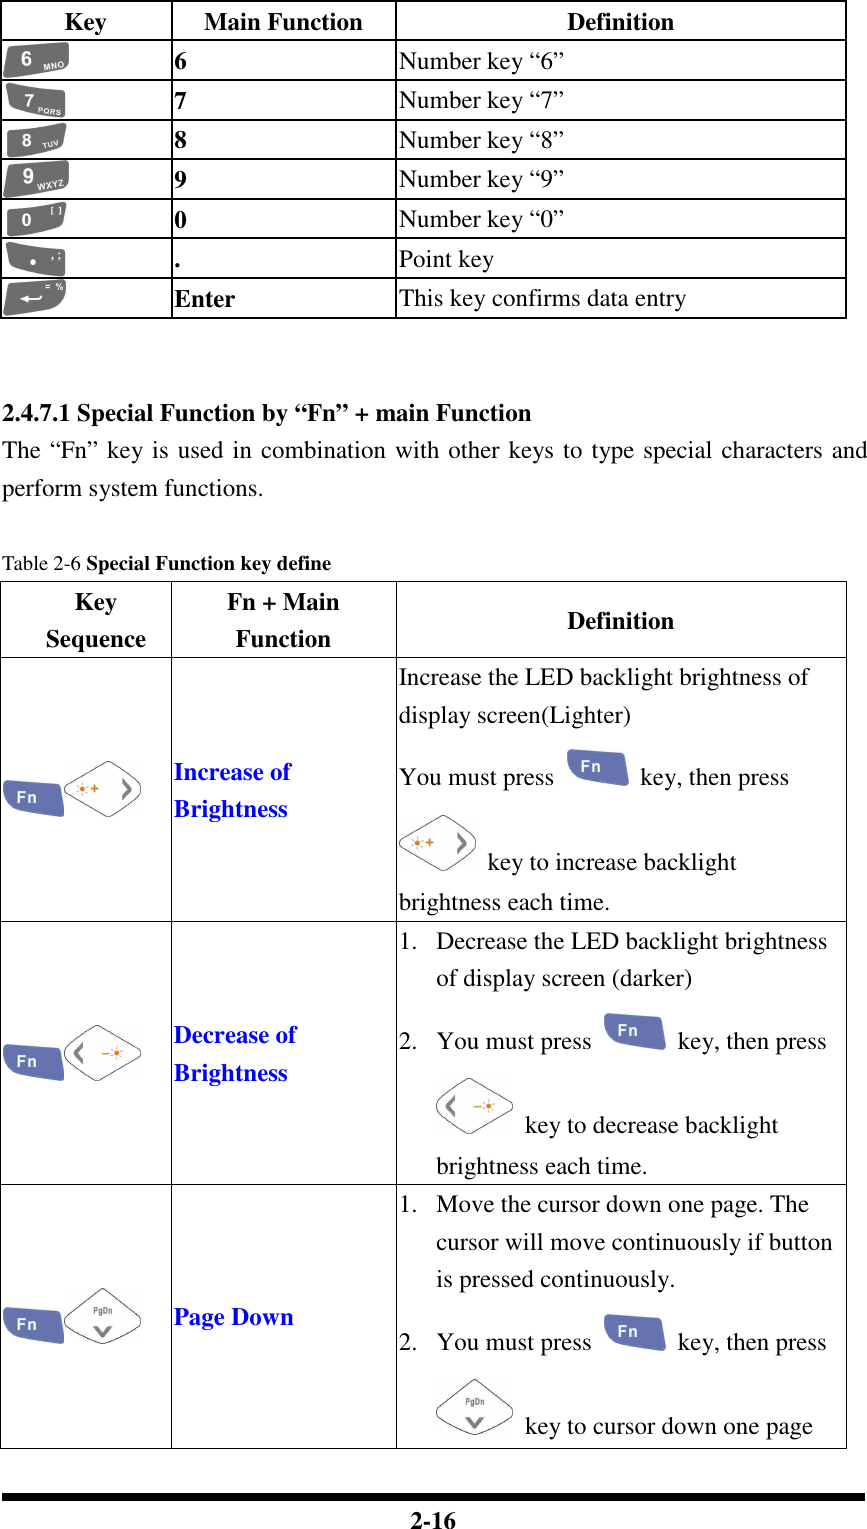  2-16 Key  Main Function  Definition  6  Number key “6”  7  Number key “7”  8  Number key “8”  9  Number key “9”  0  Number key “0”  .  Point key  Enter  This key confirms data entry   2.4.7.1 Special Function by “Fn” + main Function The “Fn” key is used in combination with other keys to type special characters and perform system functions.  Table 2-6 Special Function key define Key Sequence Fn + Main Function  Definition  Increase of Brightness Increase the LED backlight brightness of display screen(Lighter) You must press    key, then press   key to increase backlight brightness each time.  Decrease of Brightness 1. Decrease the LED backlight brightness of display screen (darker) 2. You must press    key, then press   key to decrease backlight brightness each time.  Page Down 1. Move the cursor down one page. The cursor will move continuously if button is pressed continuously. 2. You must press    key, then press   key to cursor down one page 